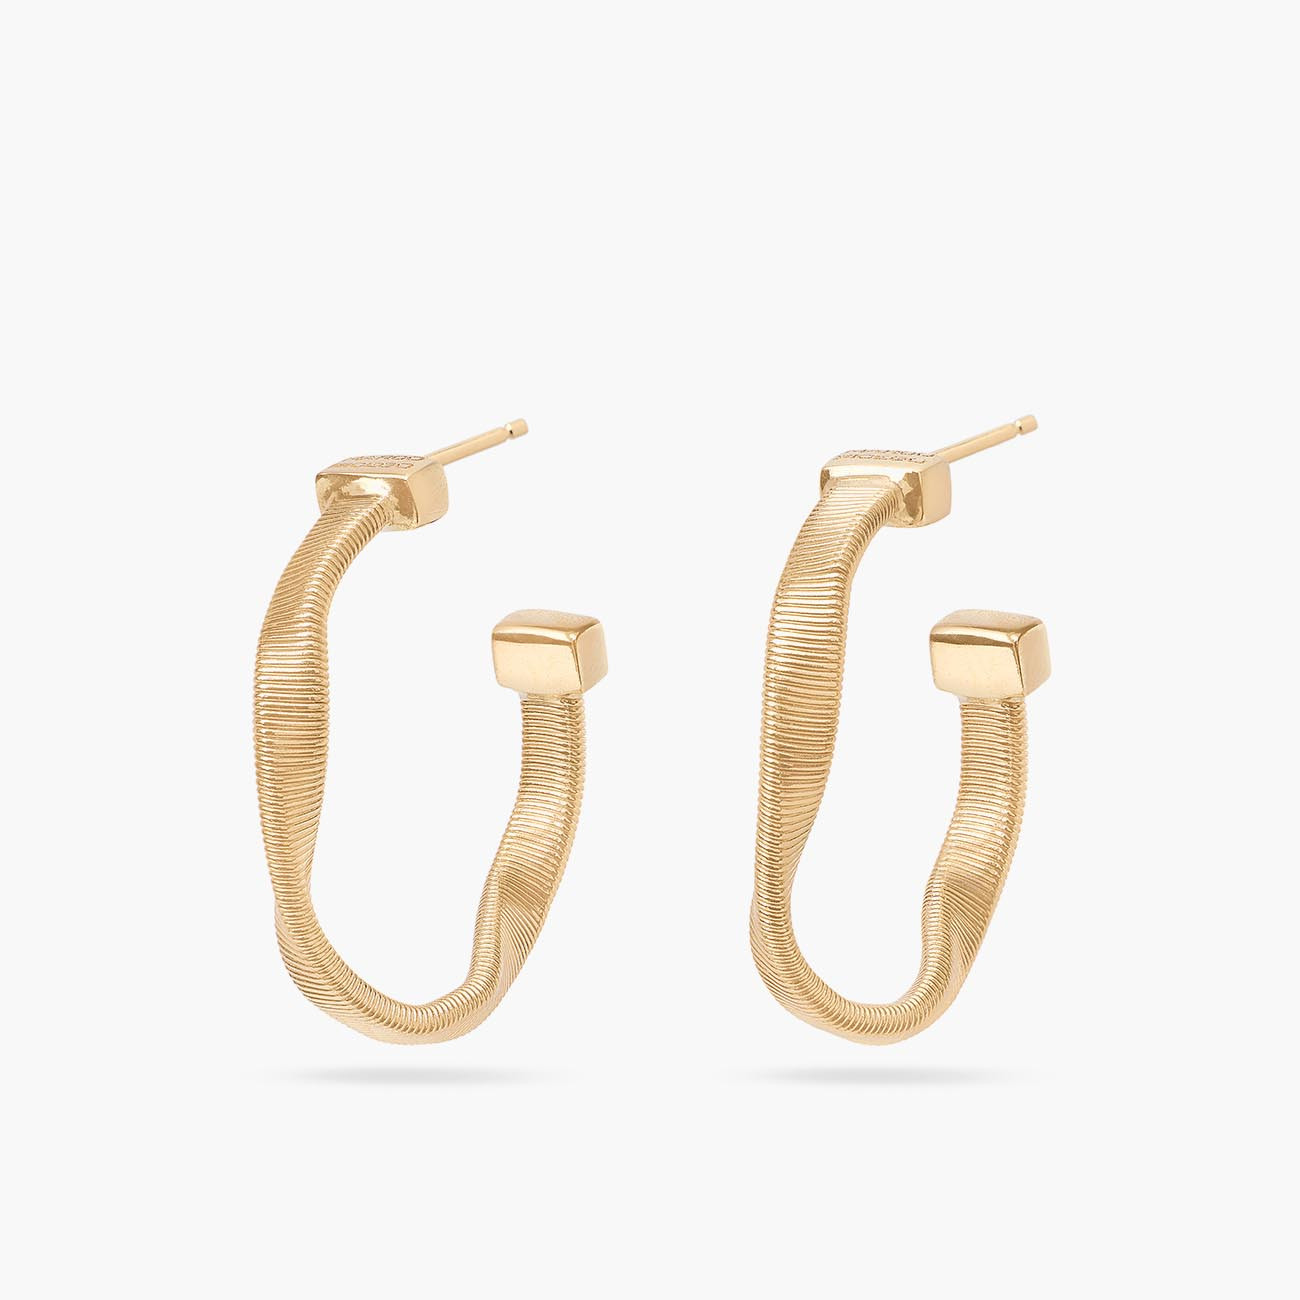 Accessorize small chunky hoop earrings in gold | ASOS